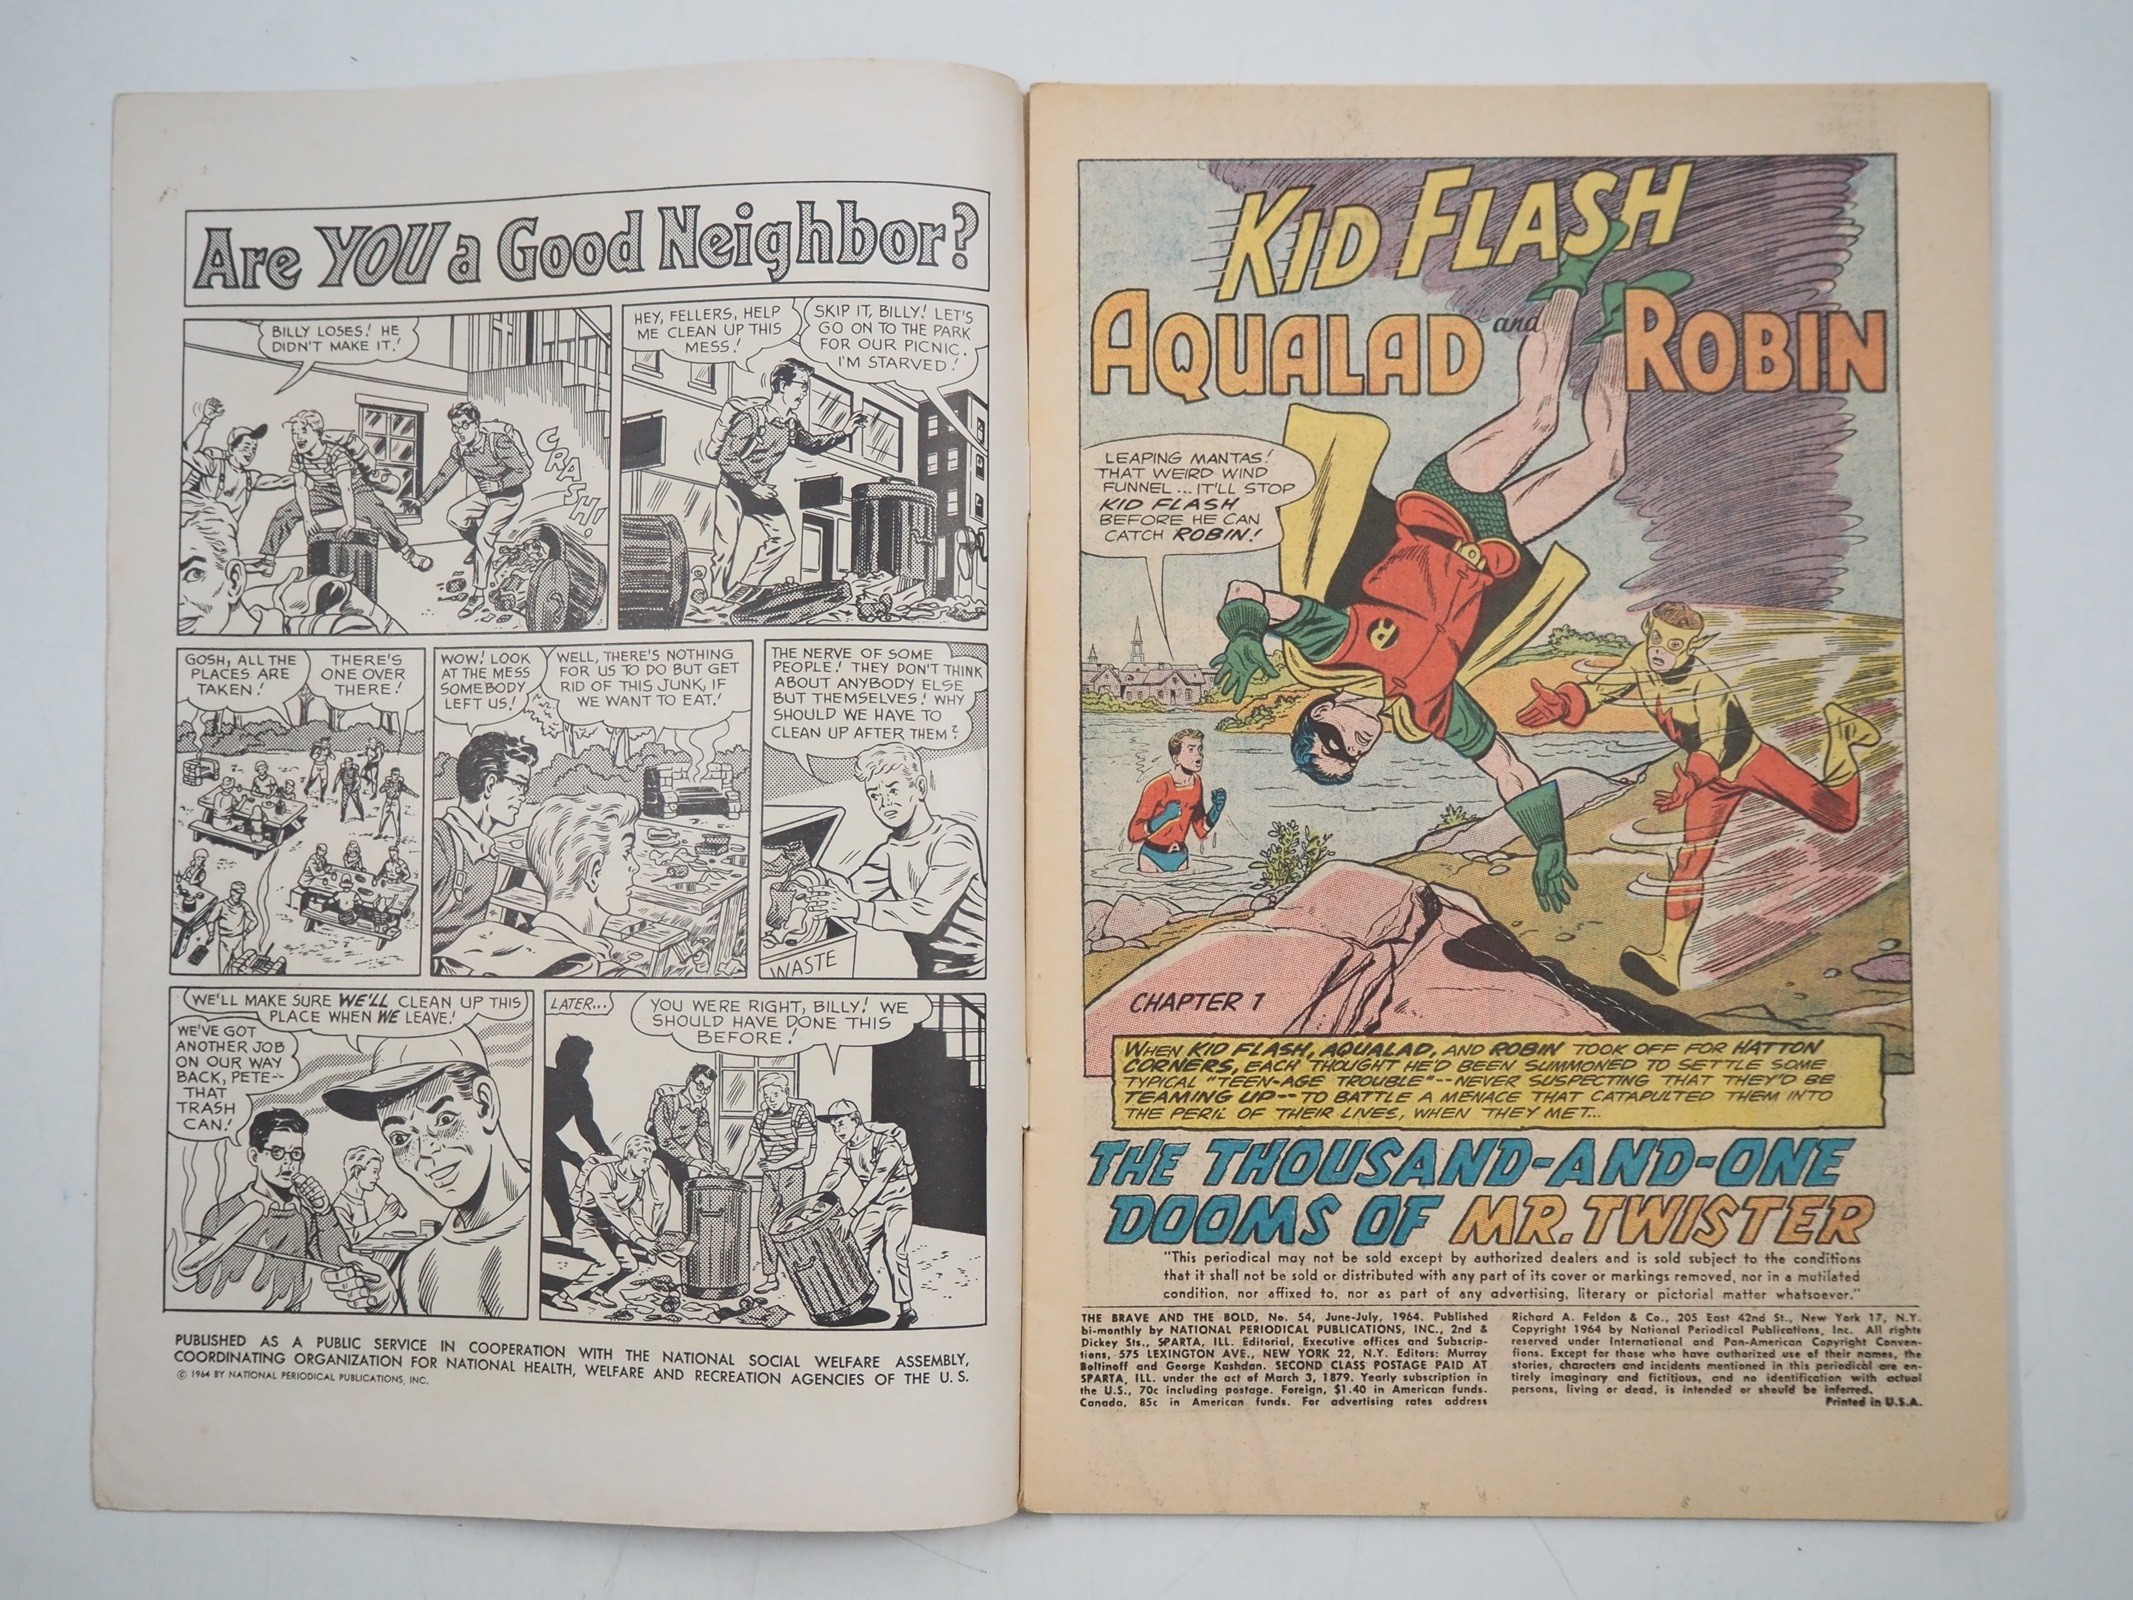 The Brave and the Bold #54 Kid Flash, Aqualad, and Robin (DC, 1964